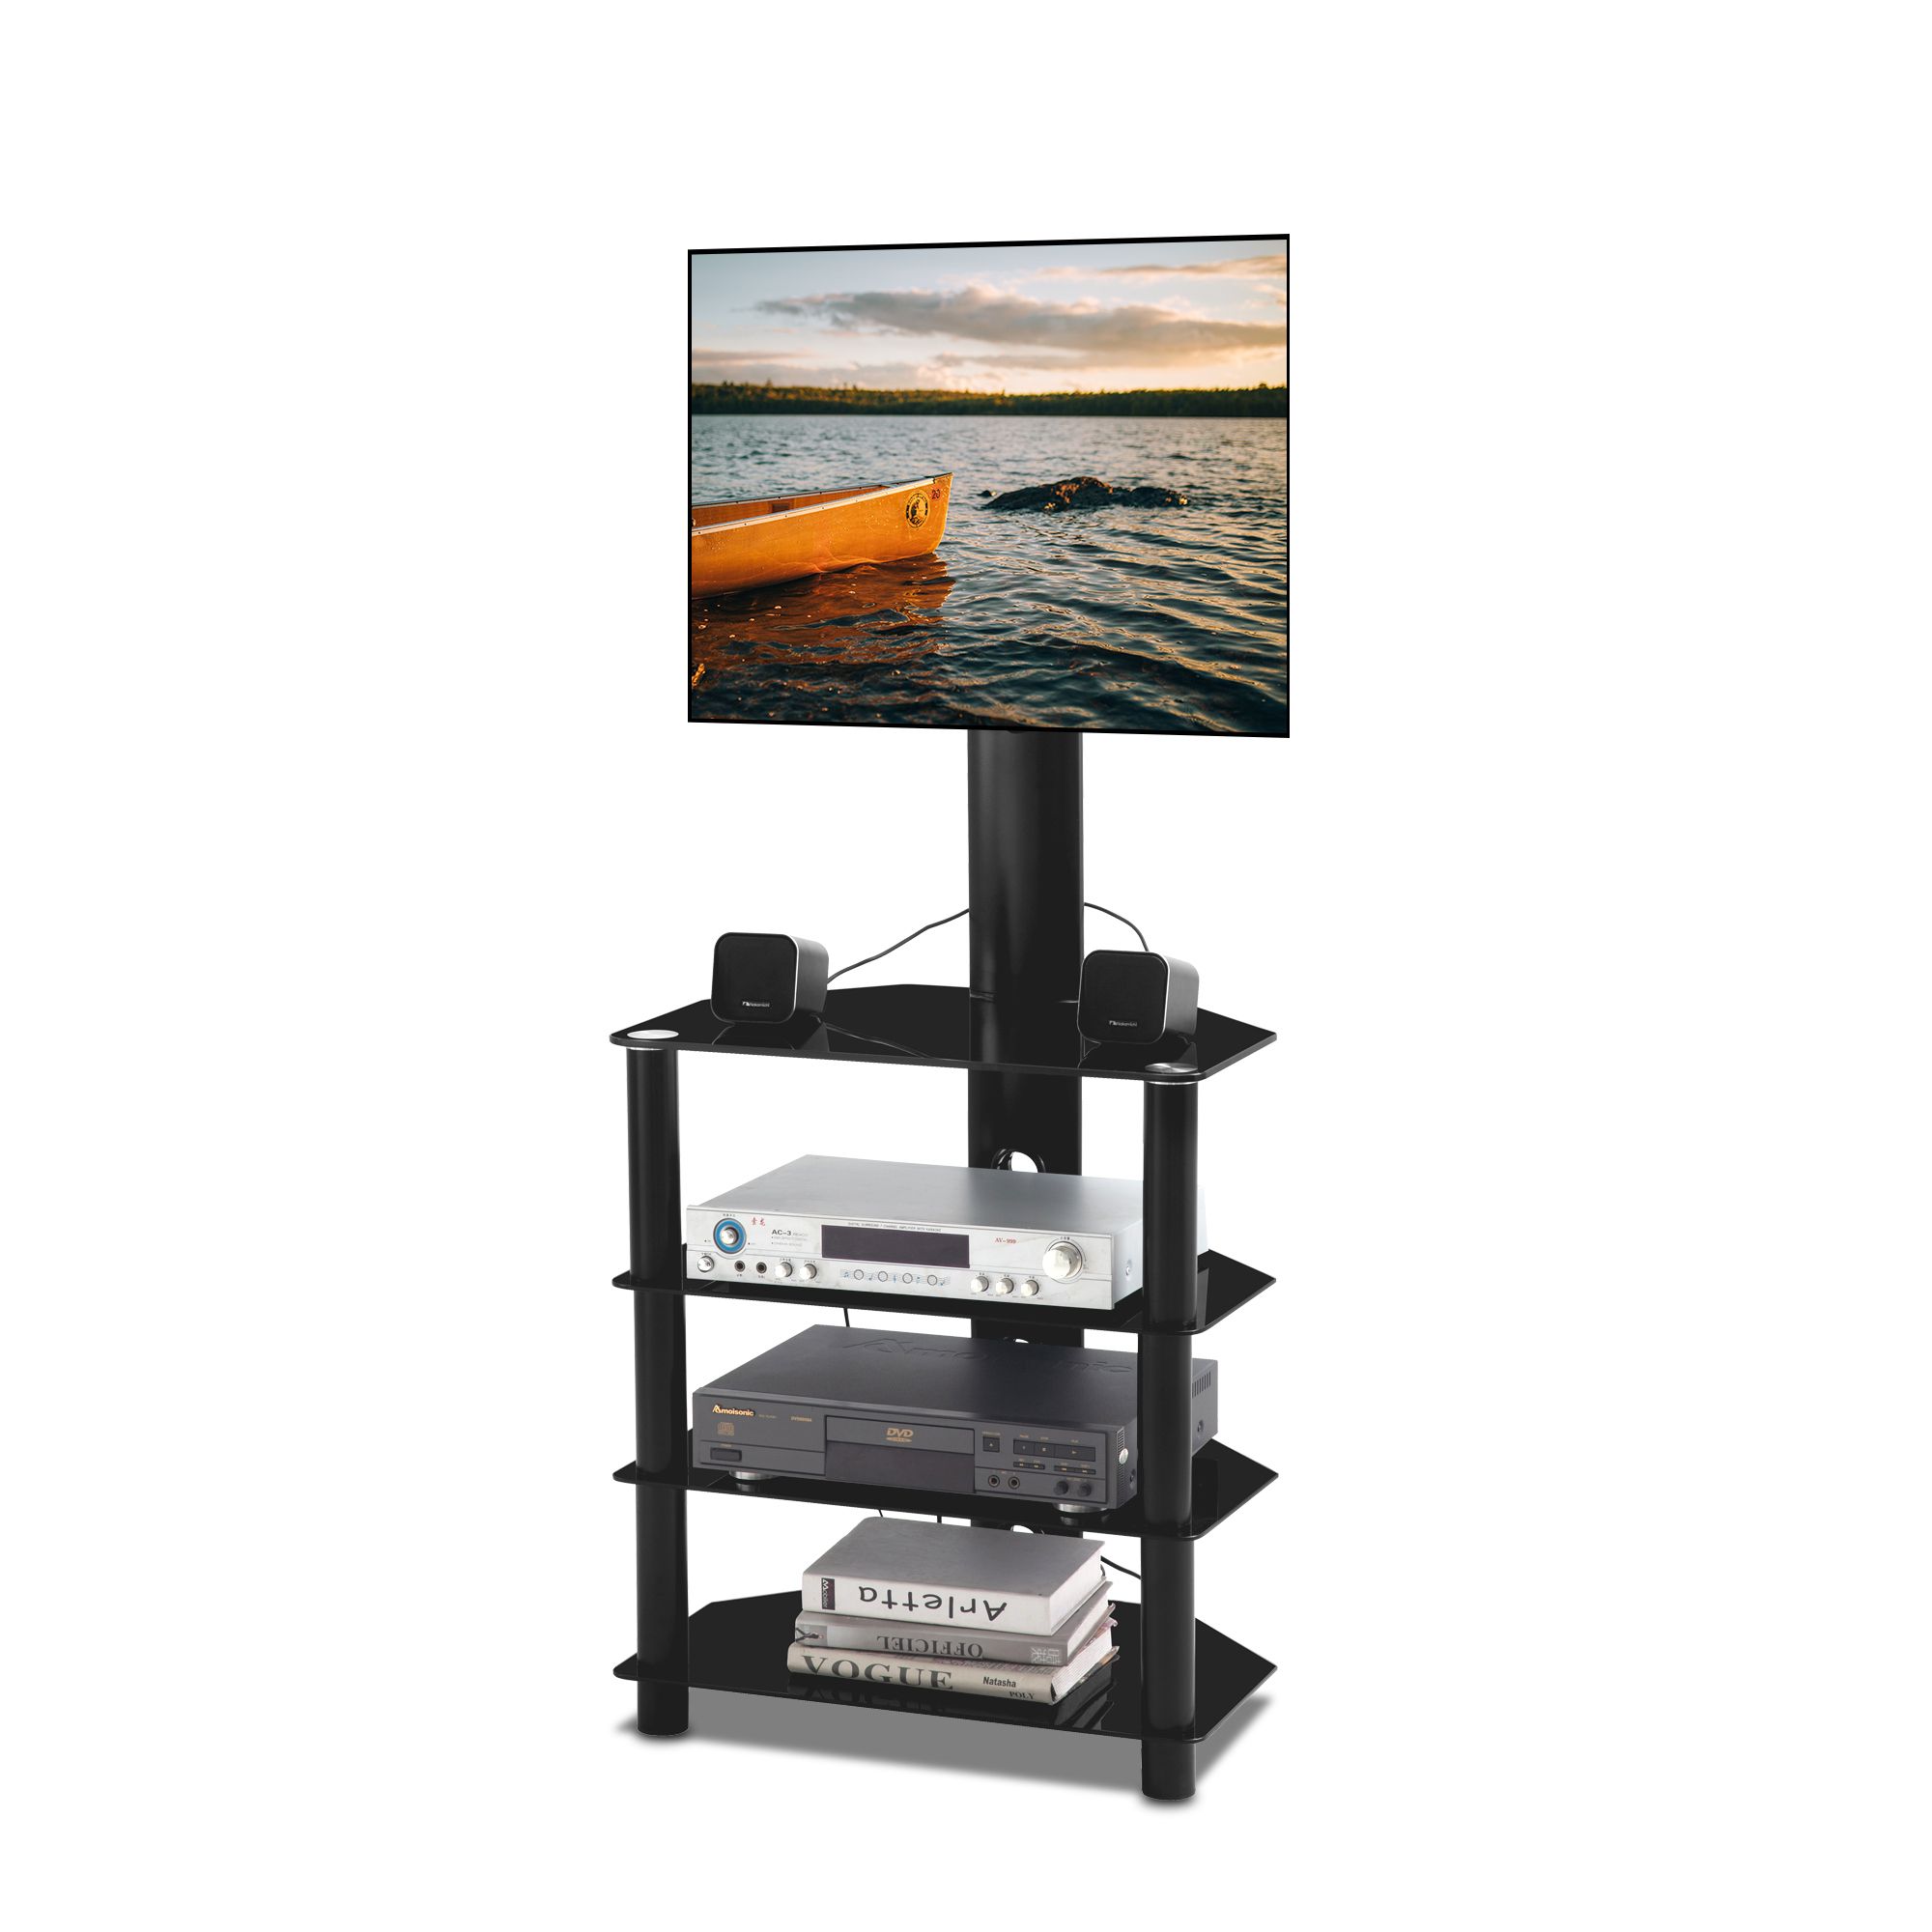 Tv Stand Base, Swivel Universal Tv Stand, Height And Angle Regarding Swivel Floor Tv Stands Height Adjustable (View 5 of 15)